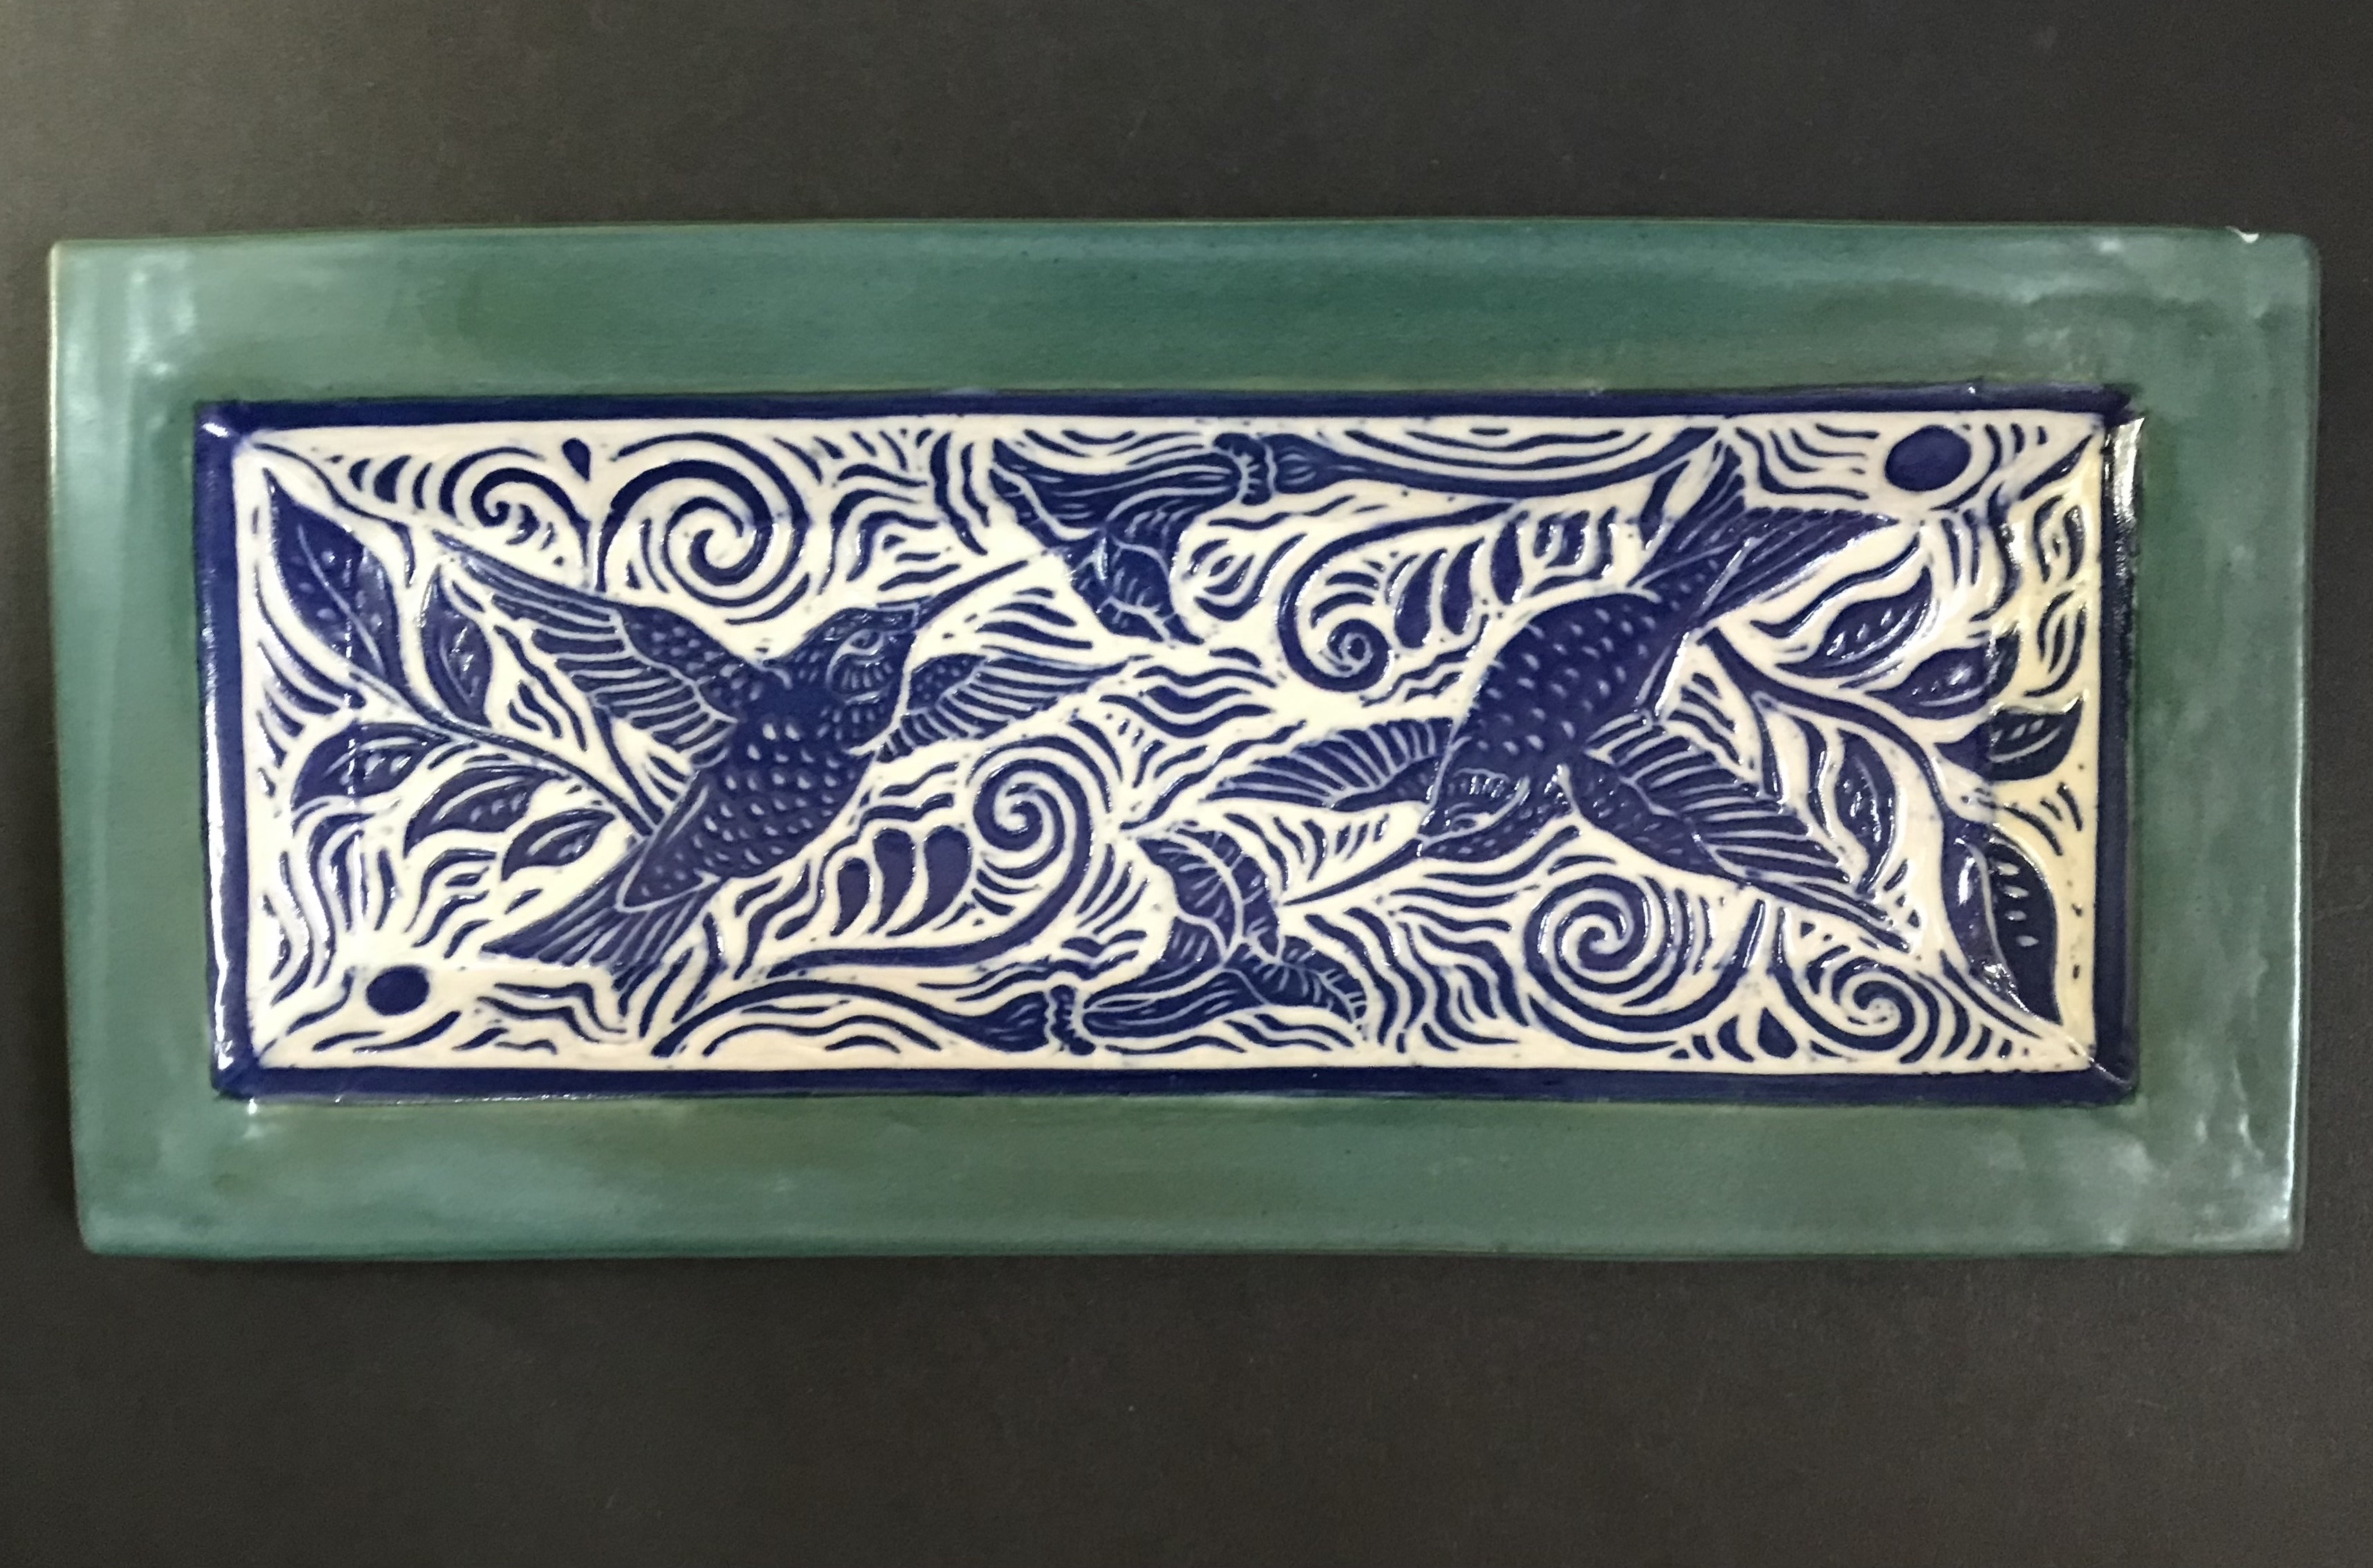 Ceramic Rectangular Serving Dish  in Cobalt Blue, White, and Turquoise with Stylized Hummingbird Desgin